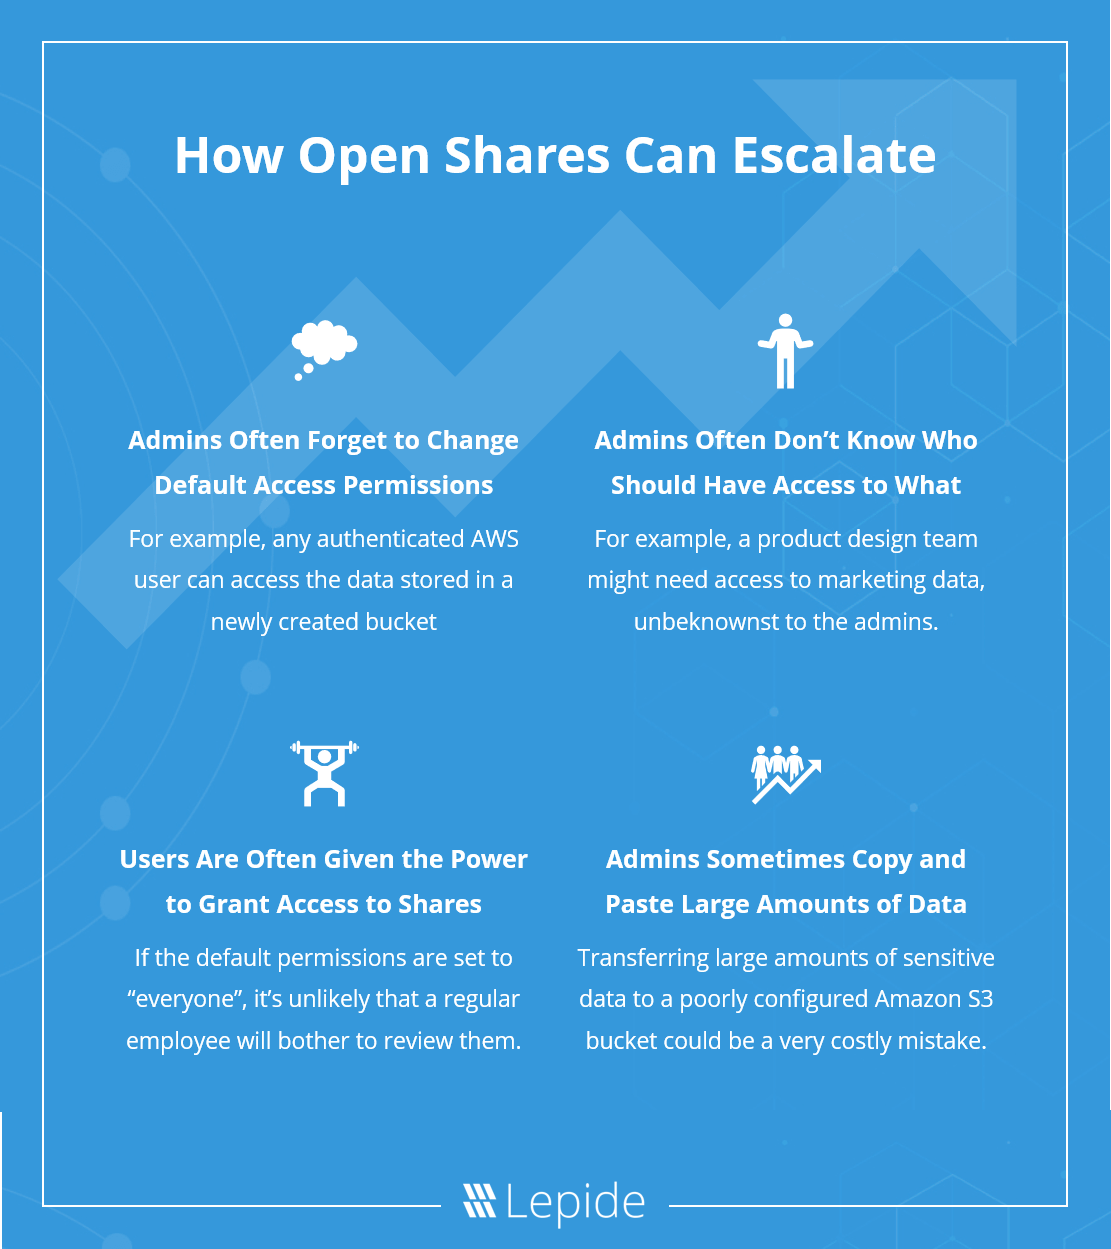 How Open Shares Can Escalate